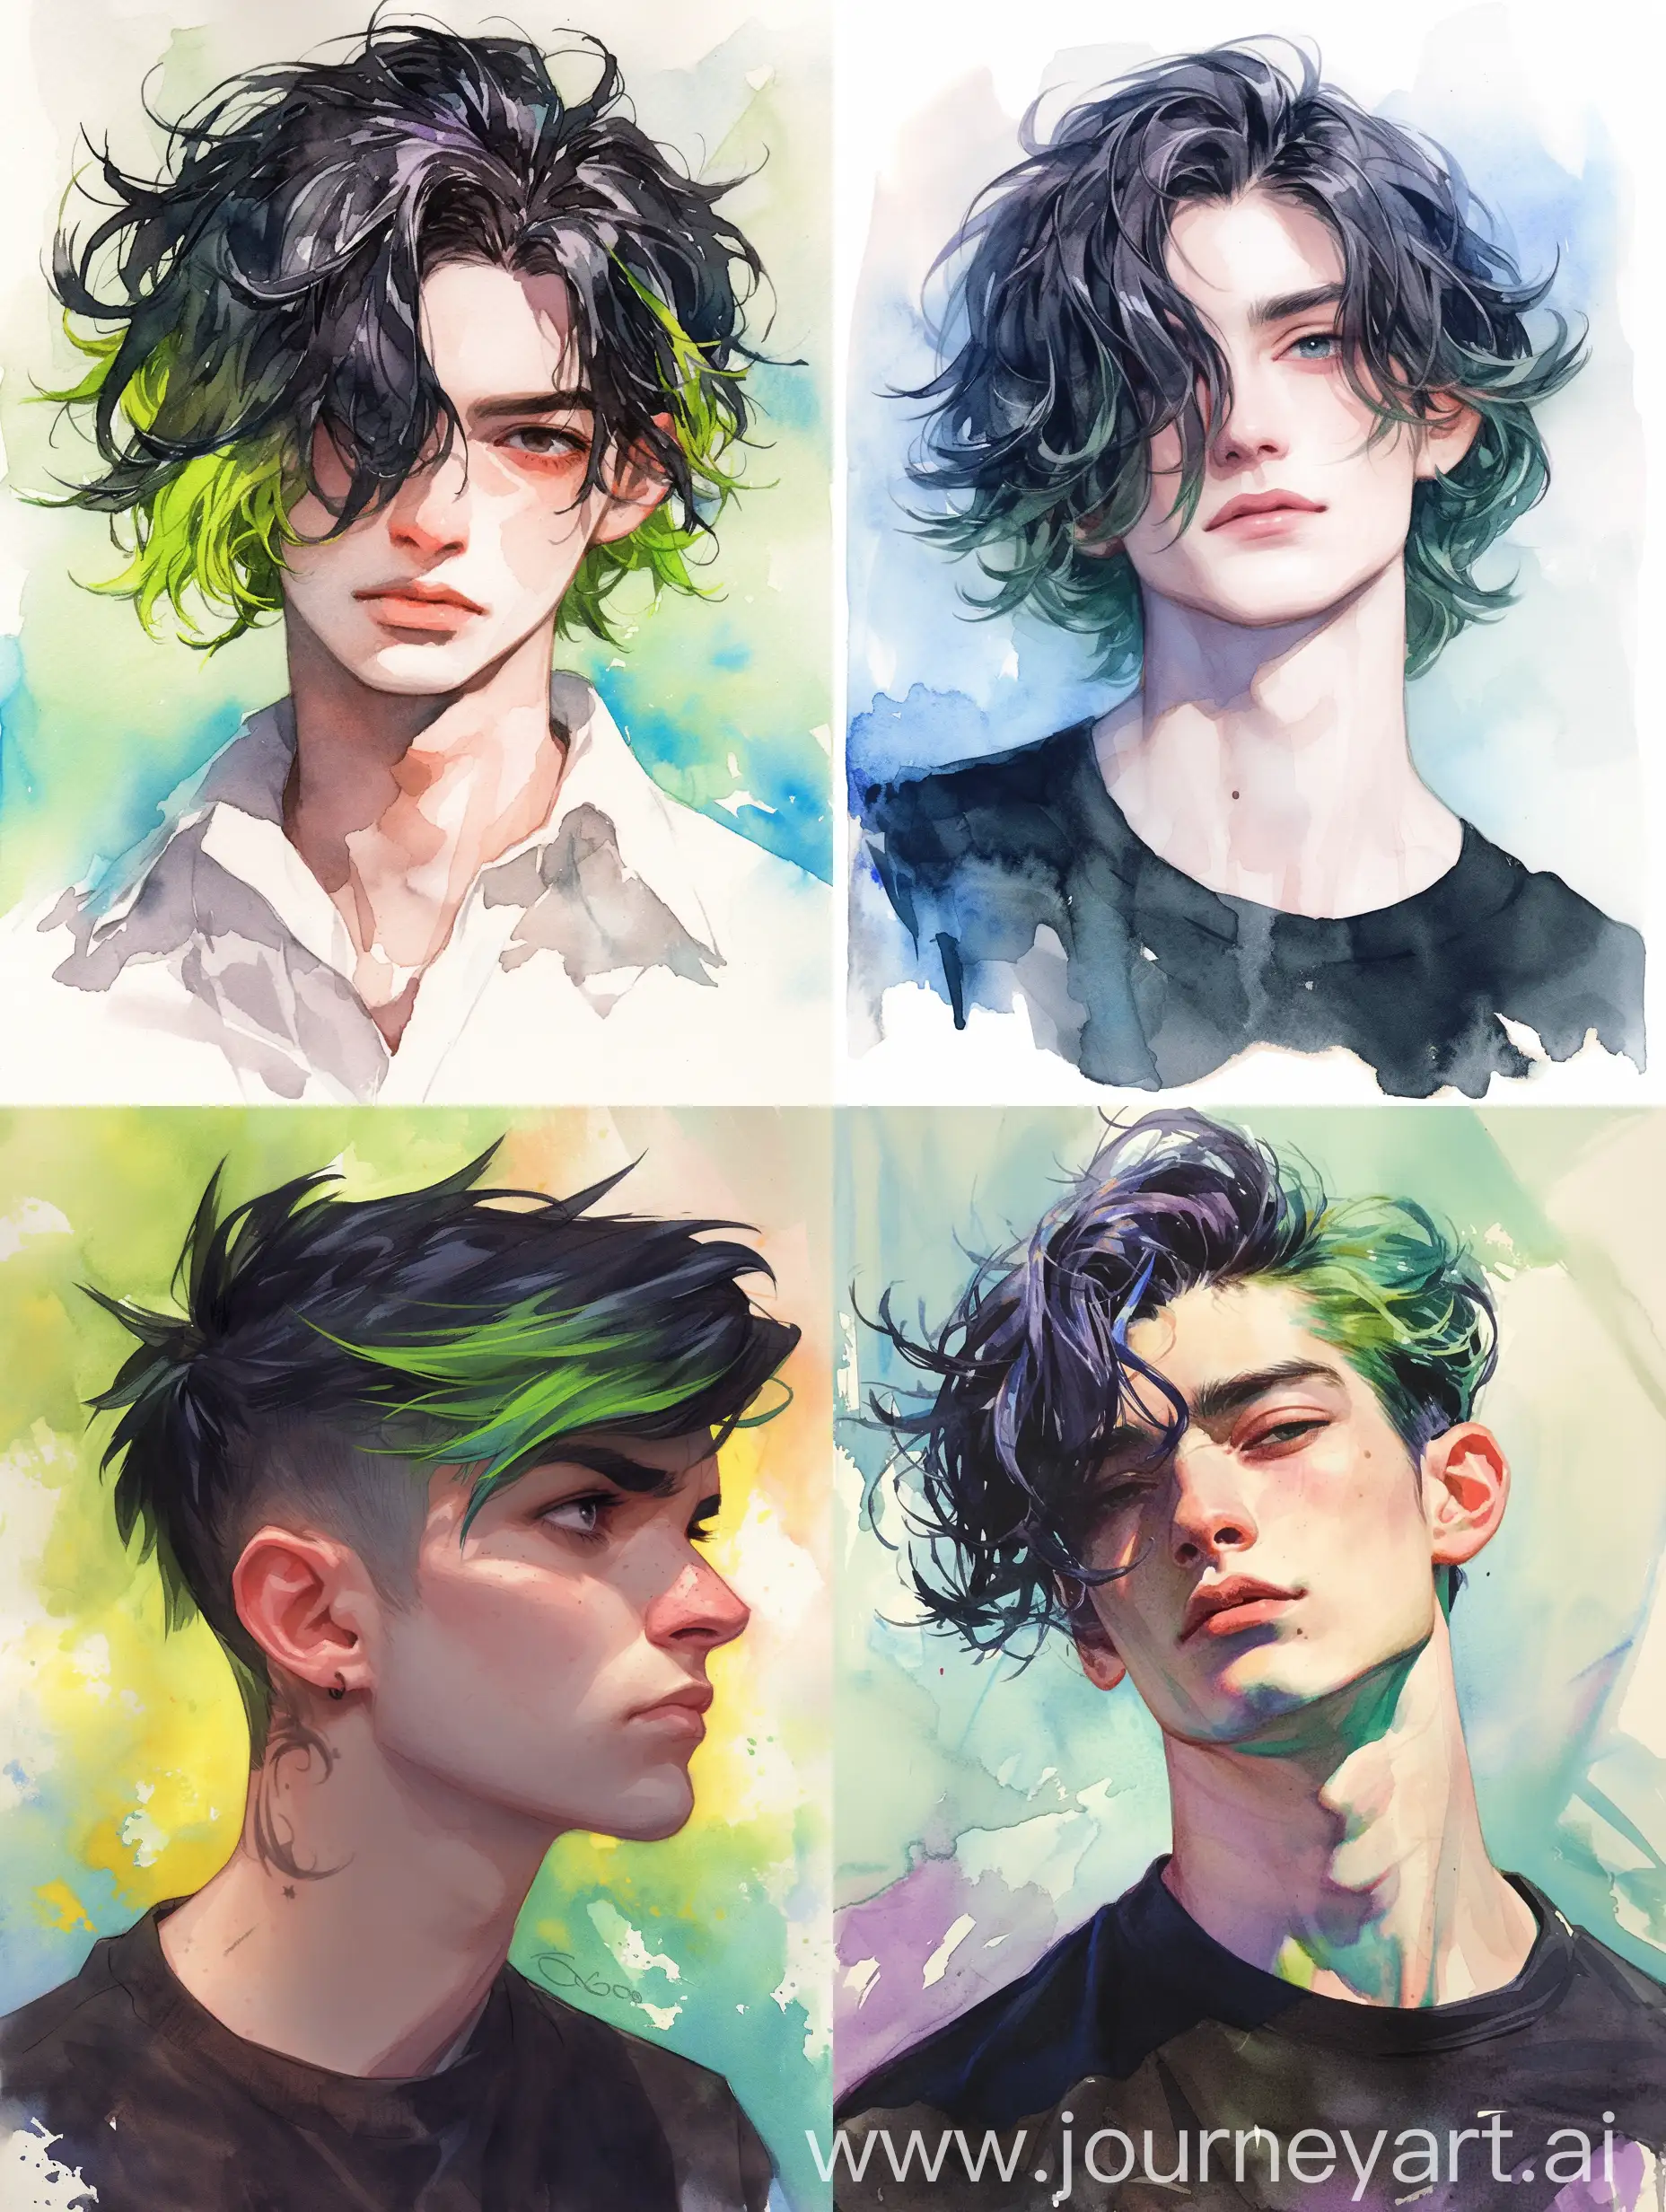 Vibrant-Male-Portrait-with-Black-and-Green-Hair-on-Colorful-Watercolor-Background